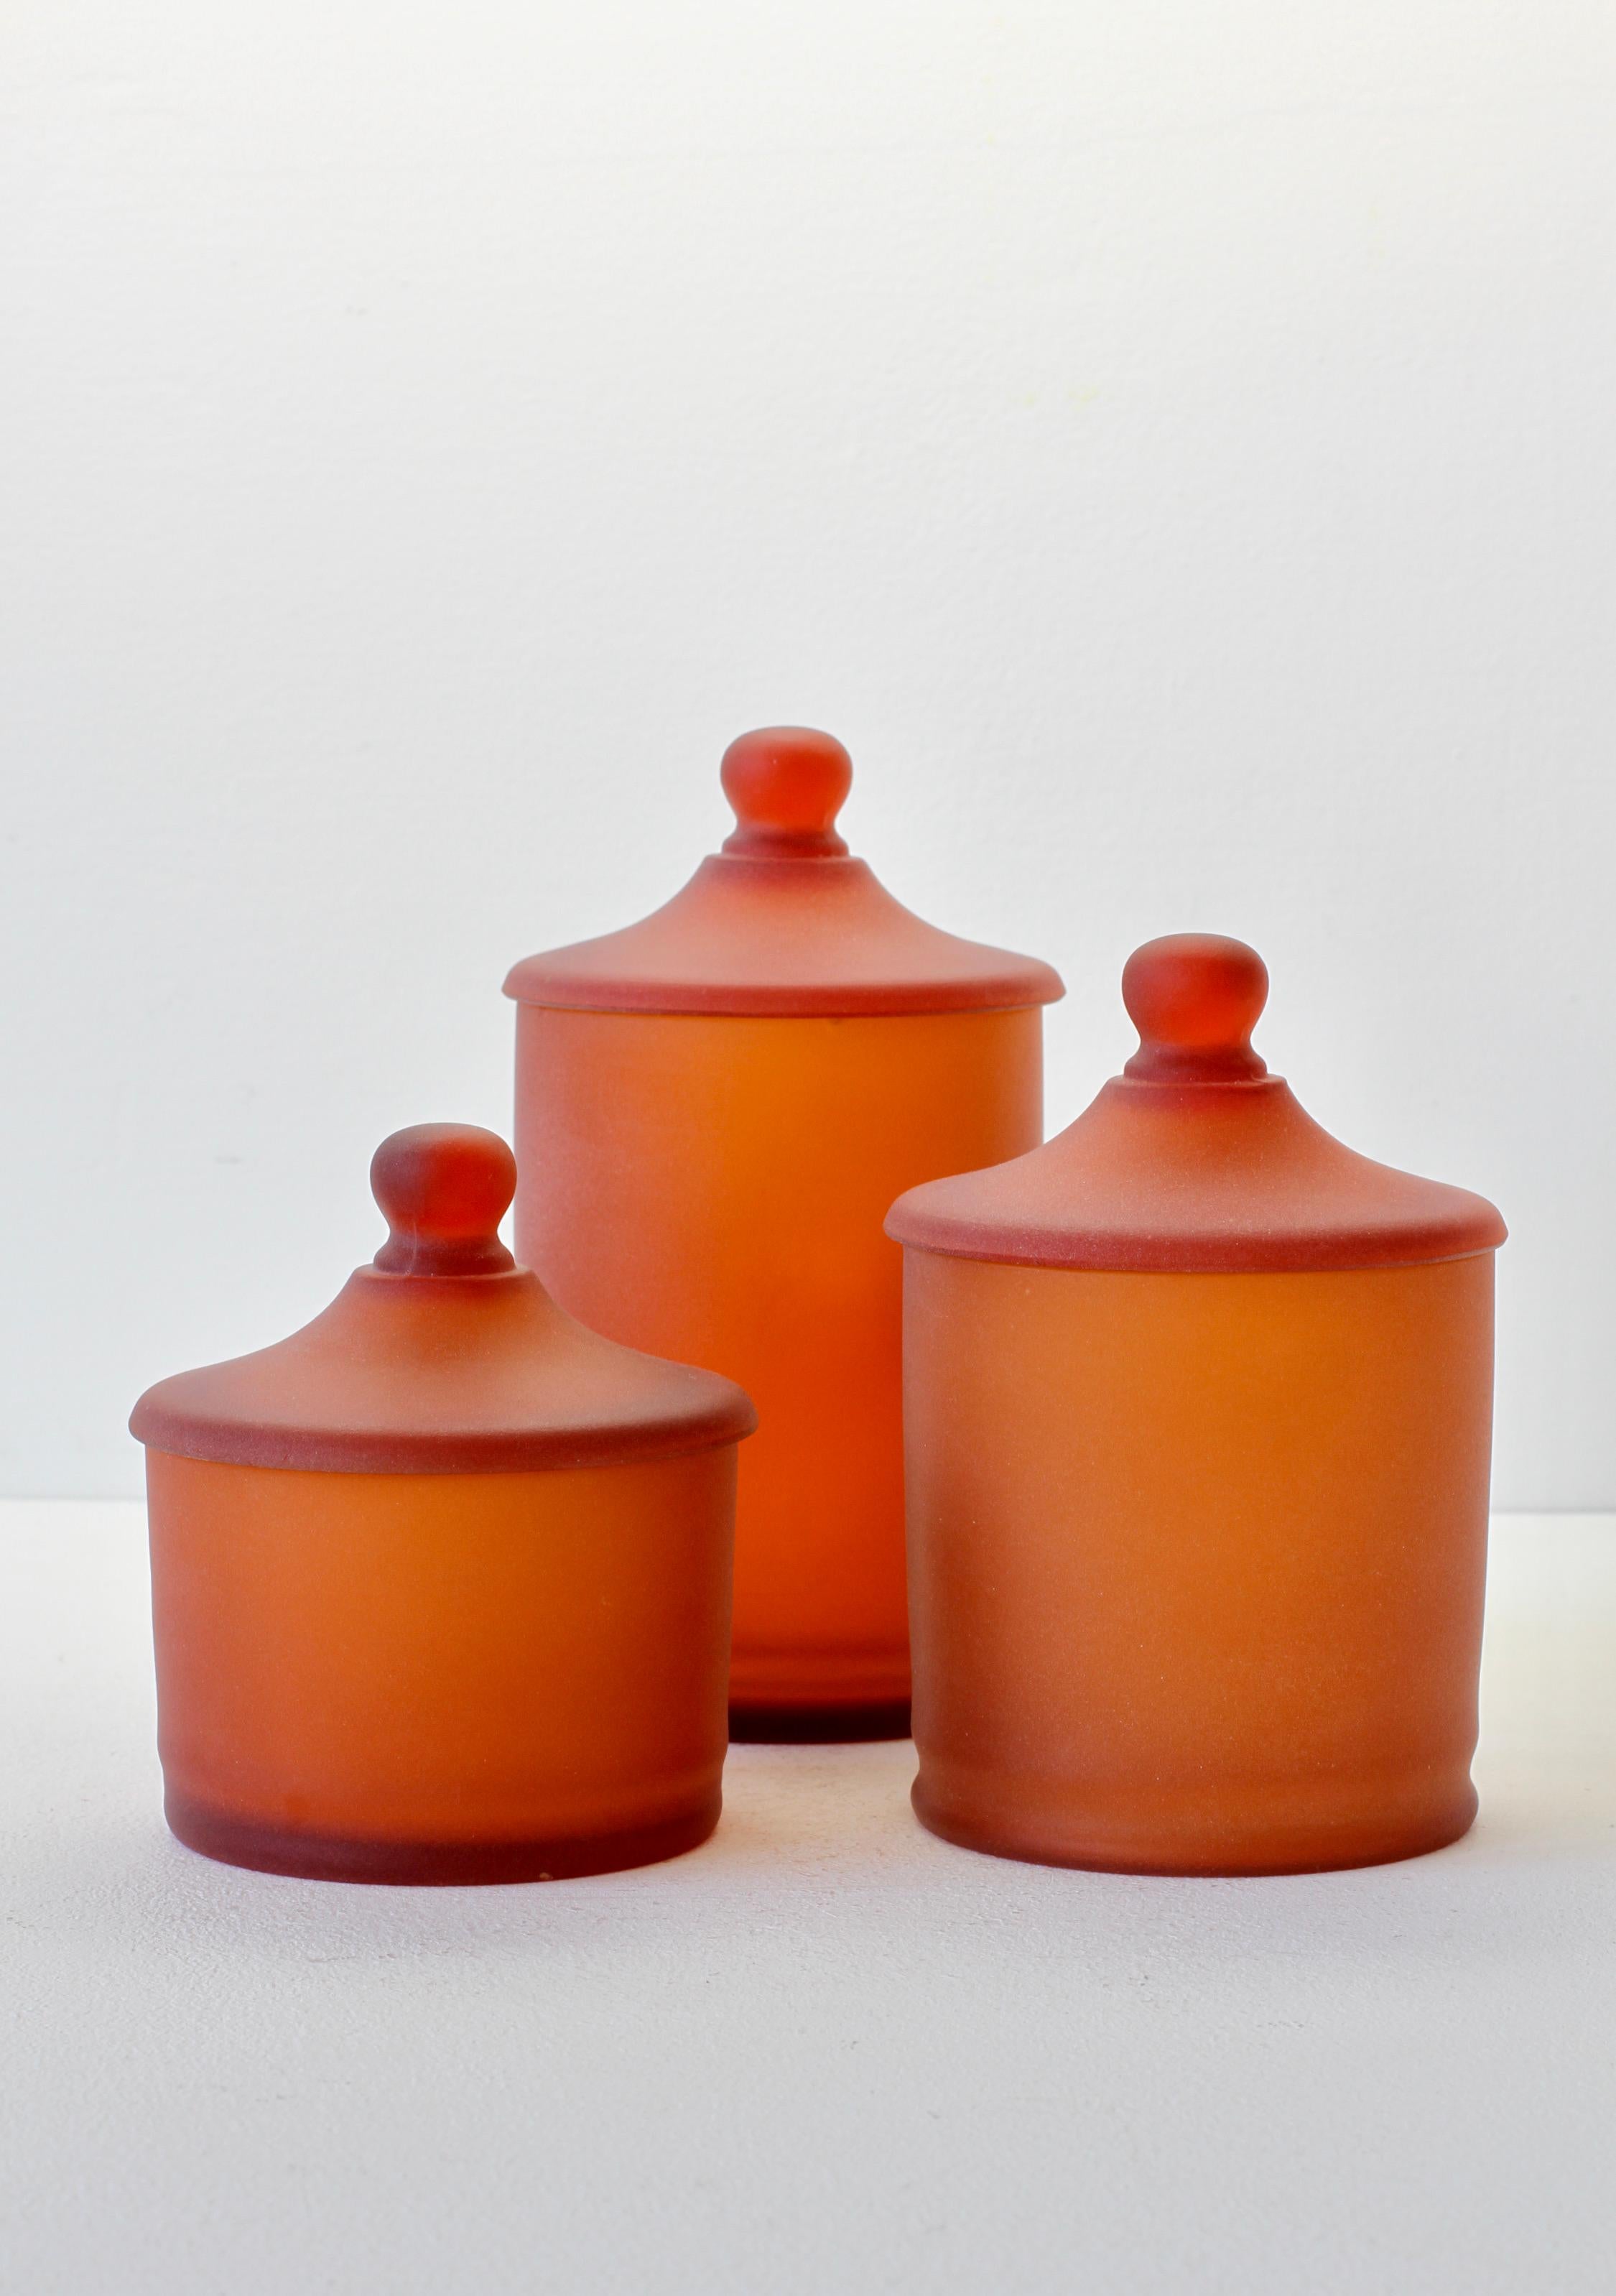 Rare set of three Venetian Murano amber colored / coloured glass Apothecary jars or urns with lids with an acid etched (corroso) finish. Wonderful vintage midcentury Italian glass and perfect for the storage sweets or snacks in the kitchen or for